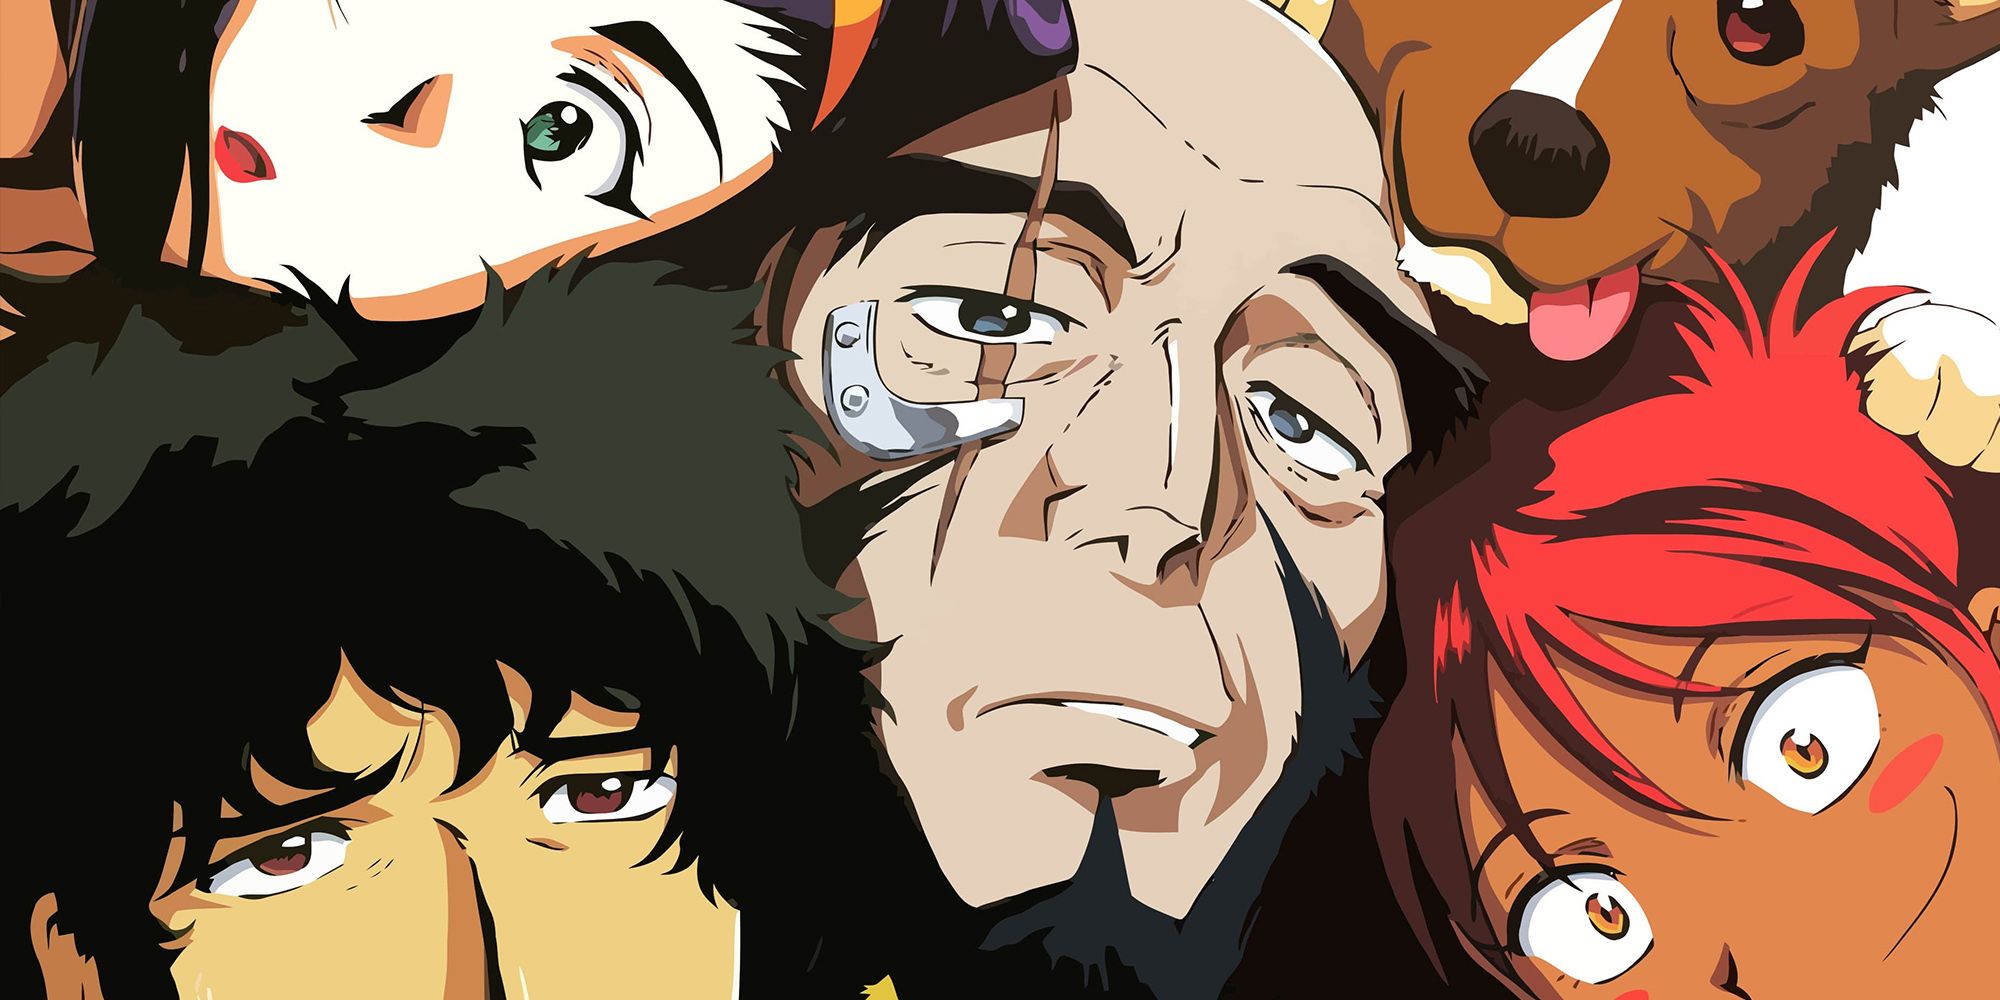 The Main Cast Of Cowboy Bebop All Squished Into The Frame